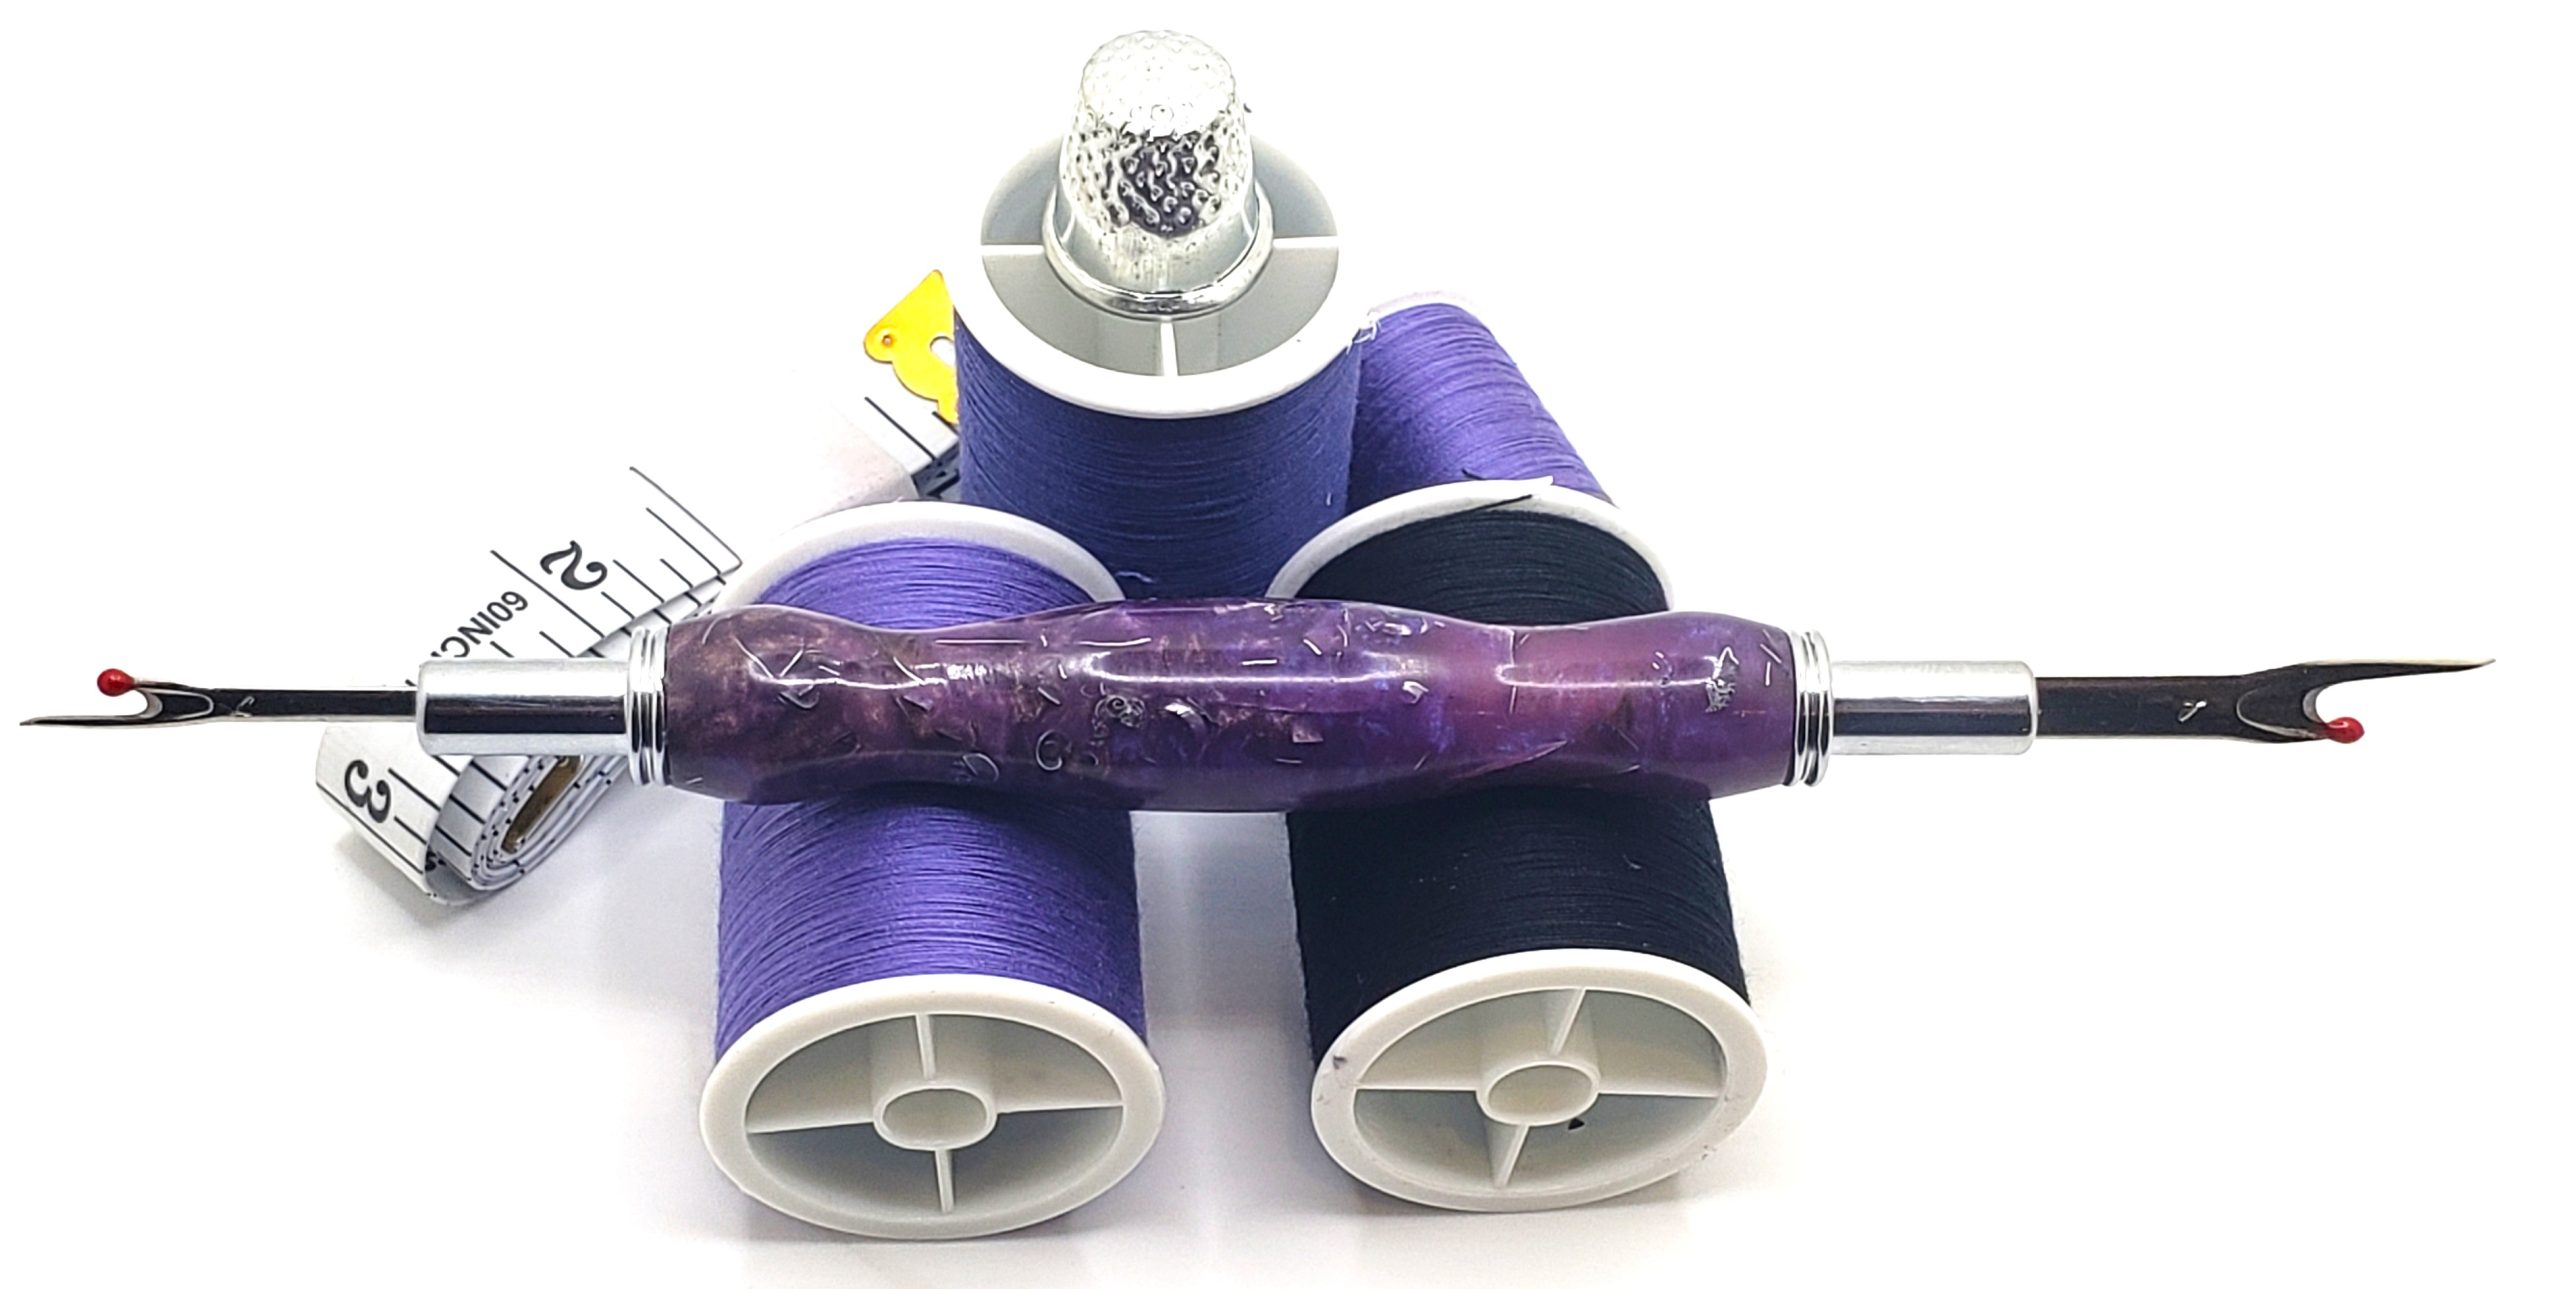 Sewing Seam Ripper / Purple Moon with 2 shades of Purple Epoxy and brass shavings. The seam ripper ends can flip and back into the shaft for protection.